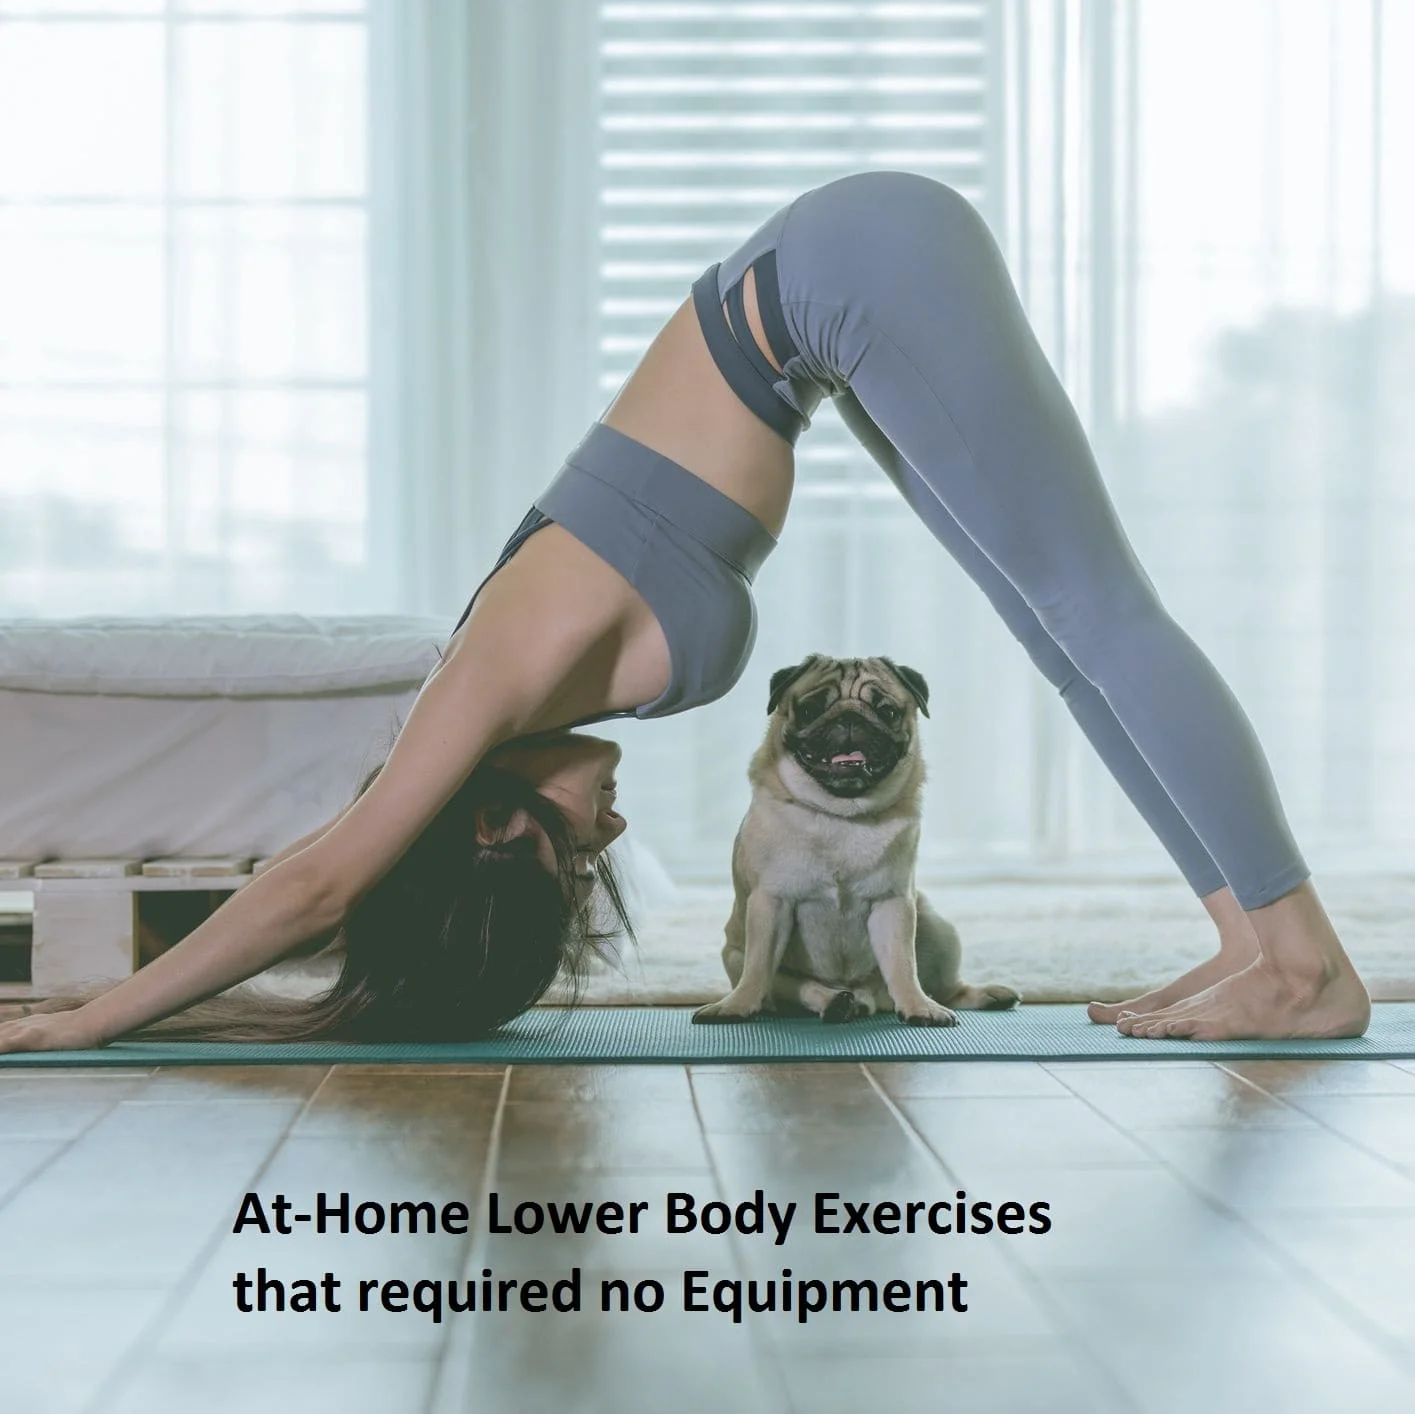 At-home lower body exercises that required no equipment